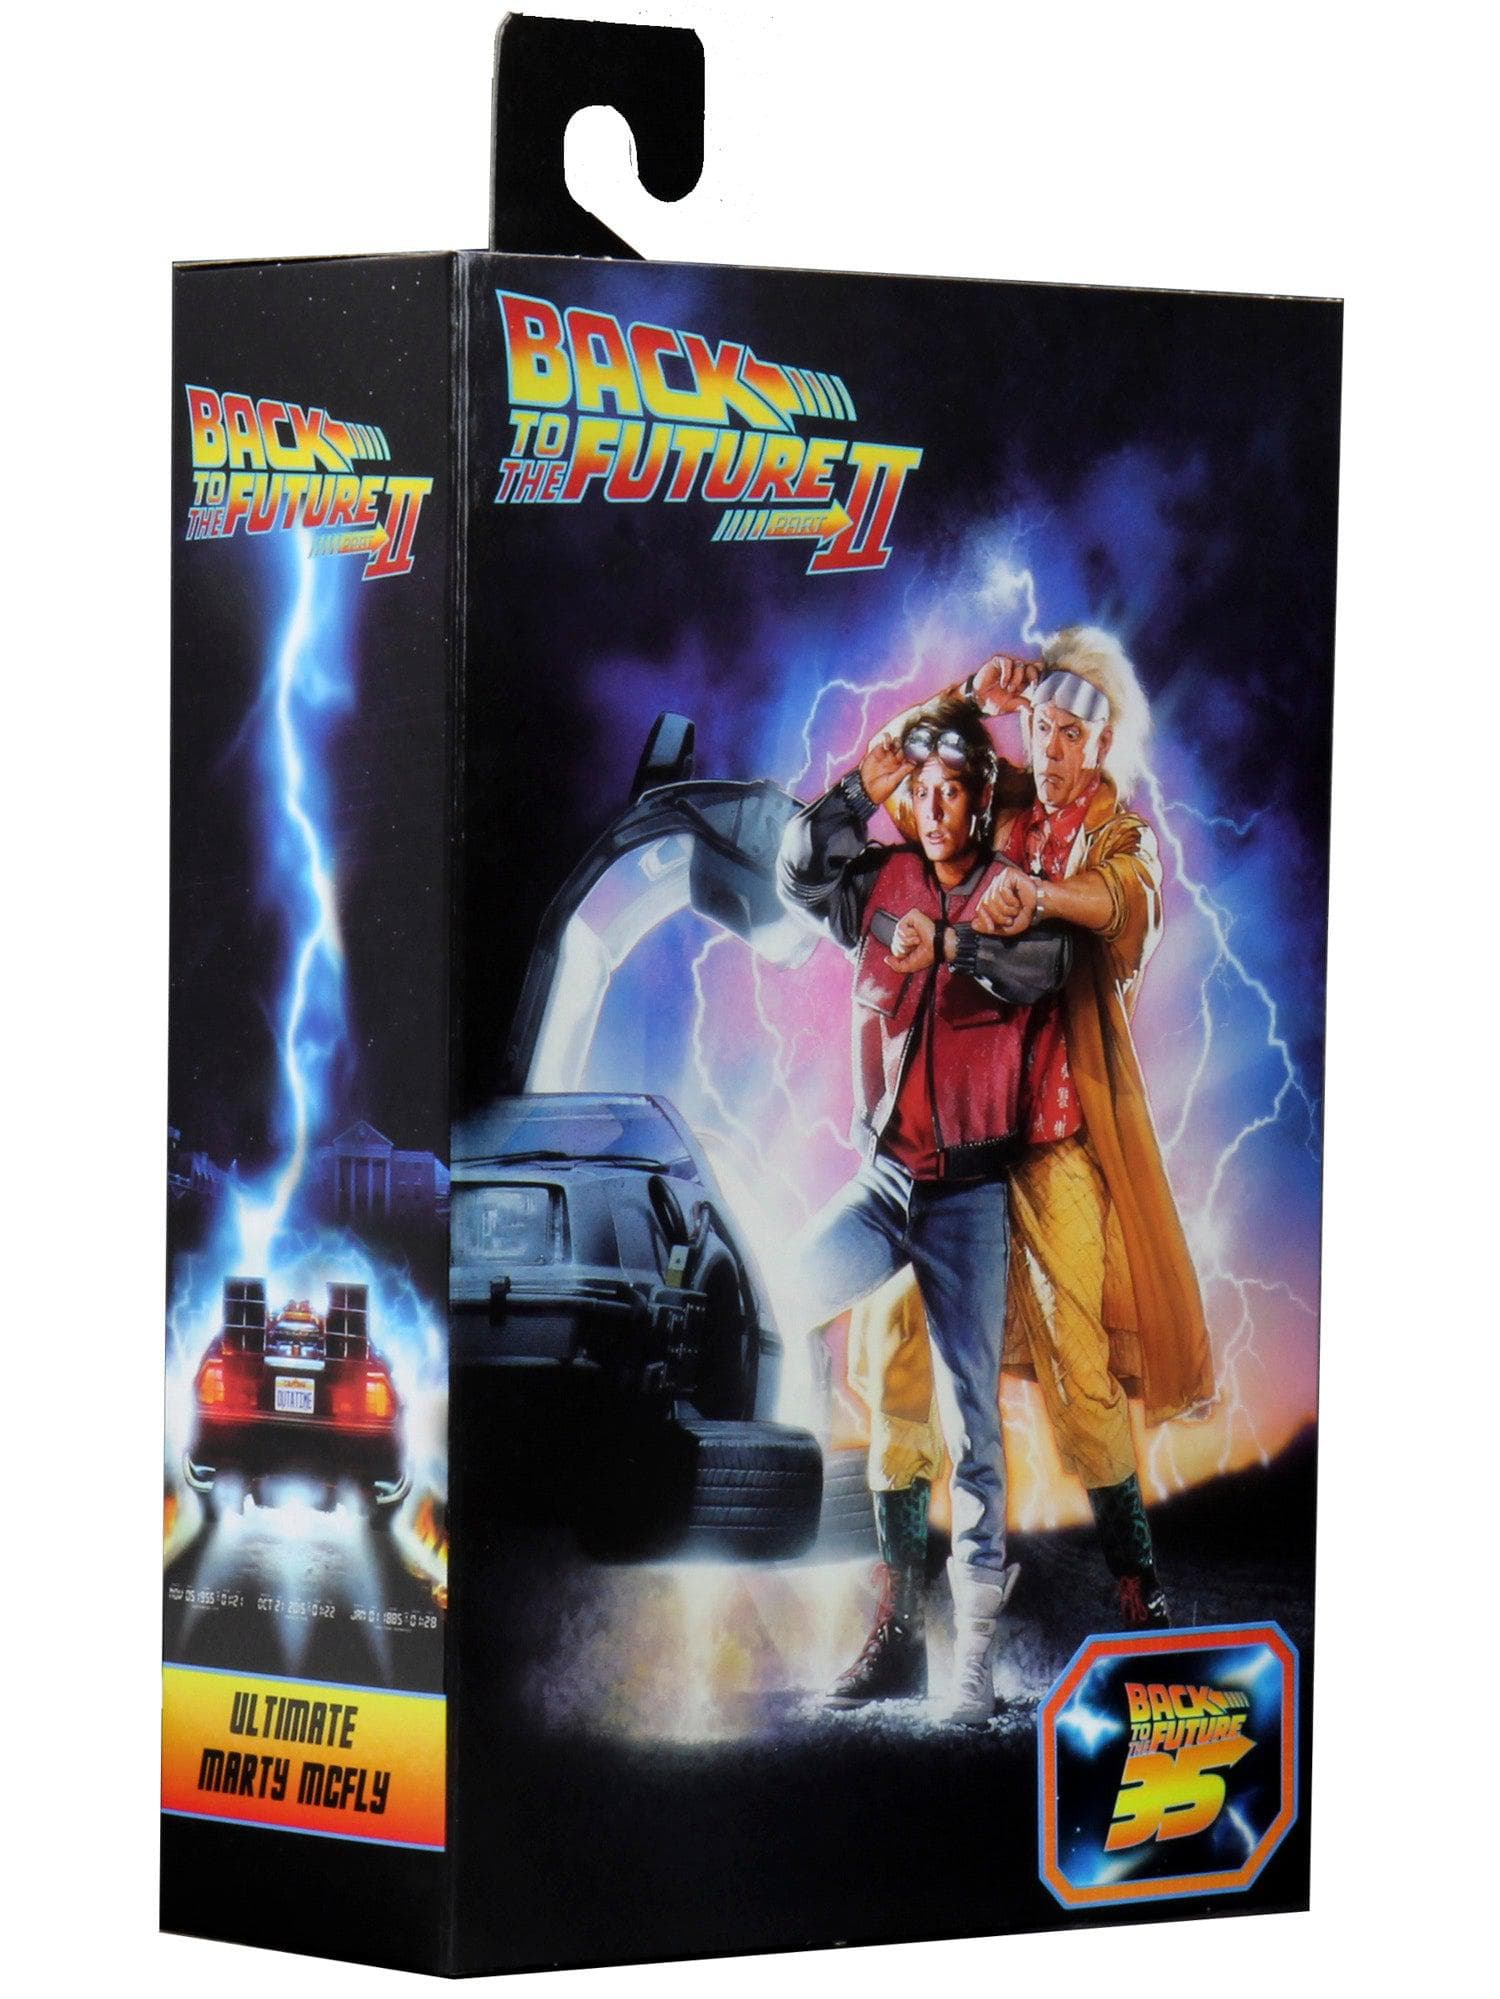 NECA - Back To The Future 2 - 7" Scale Figure - Ultimate Marty - costumes.com